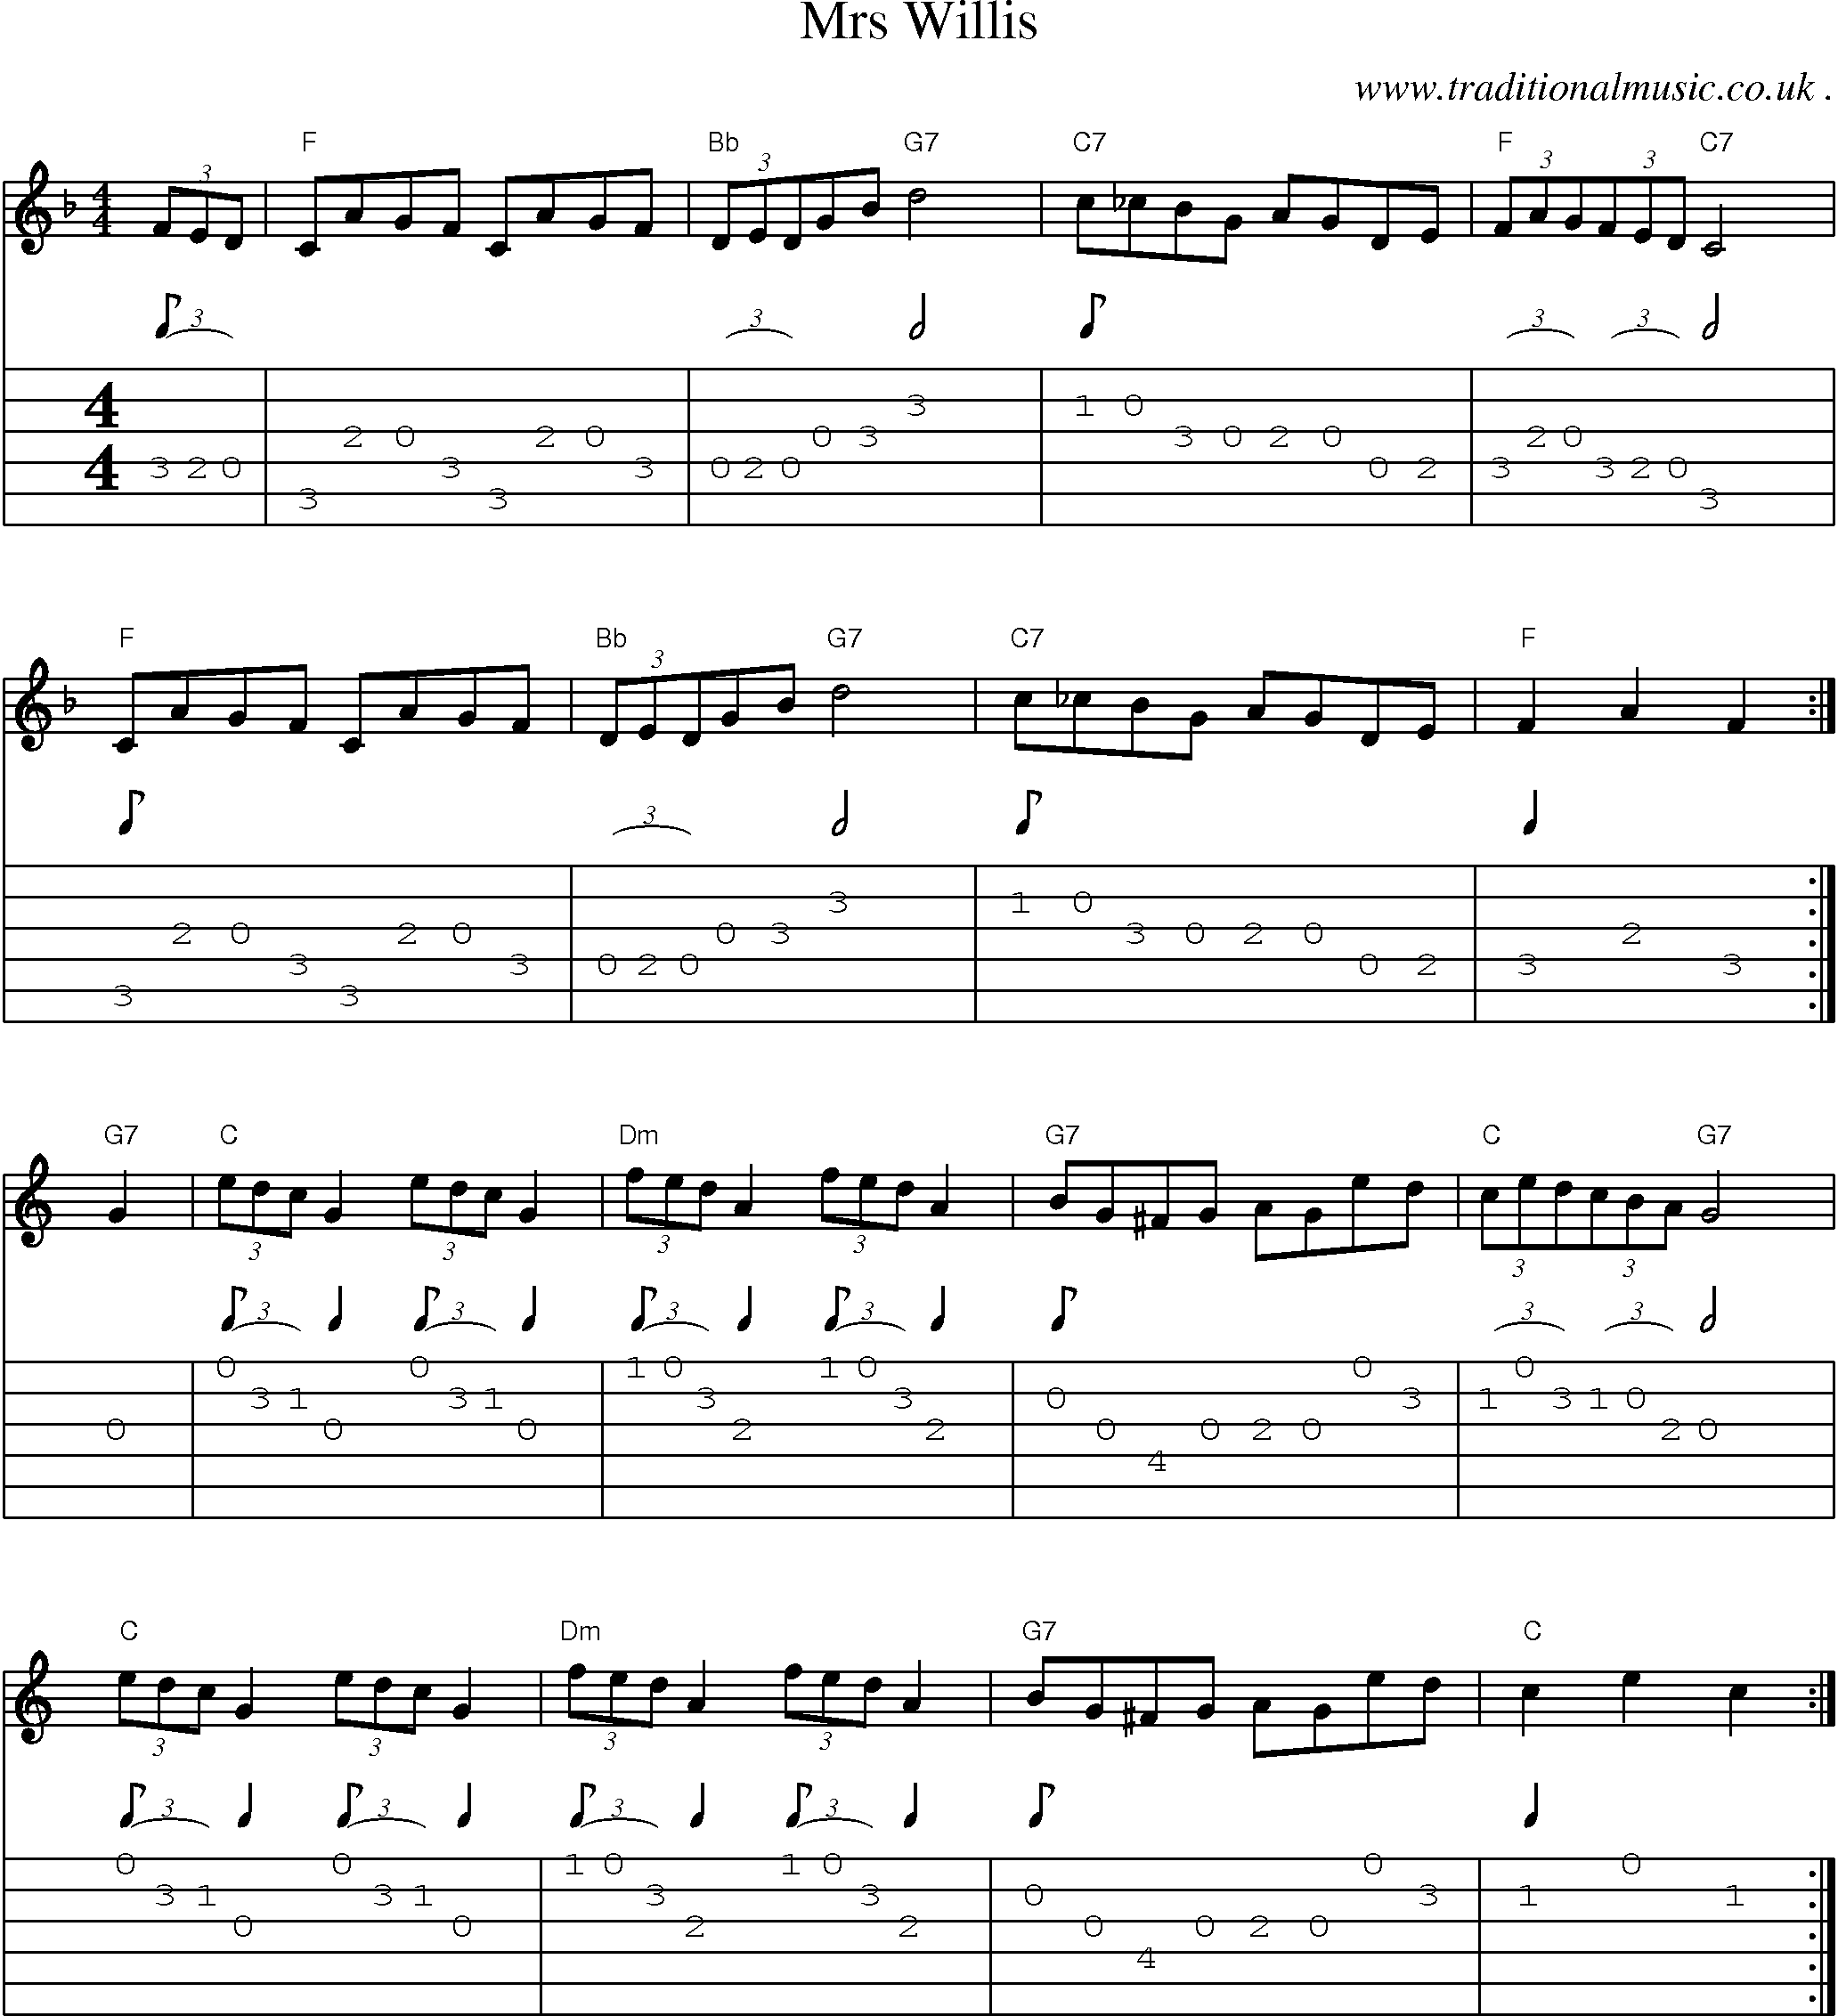 Sheet-Music and Guitar Tabs for Mrs Willis